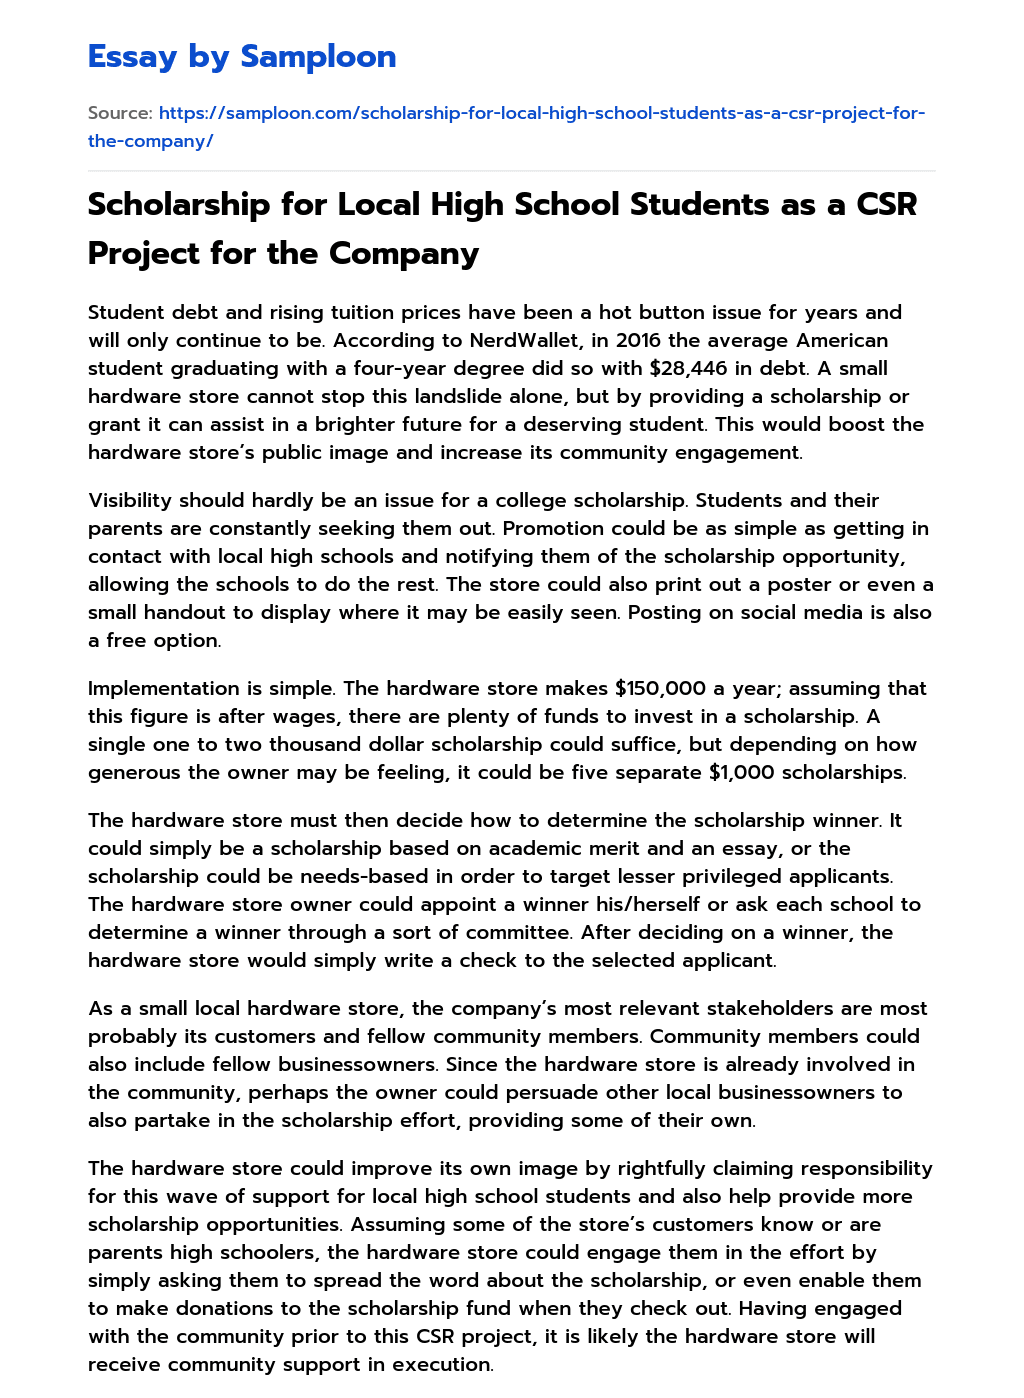 Scholarship for Local High School Students as a CSR Project for the Company essay